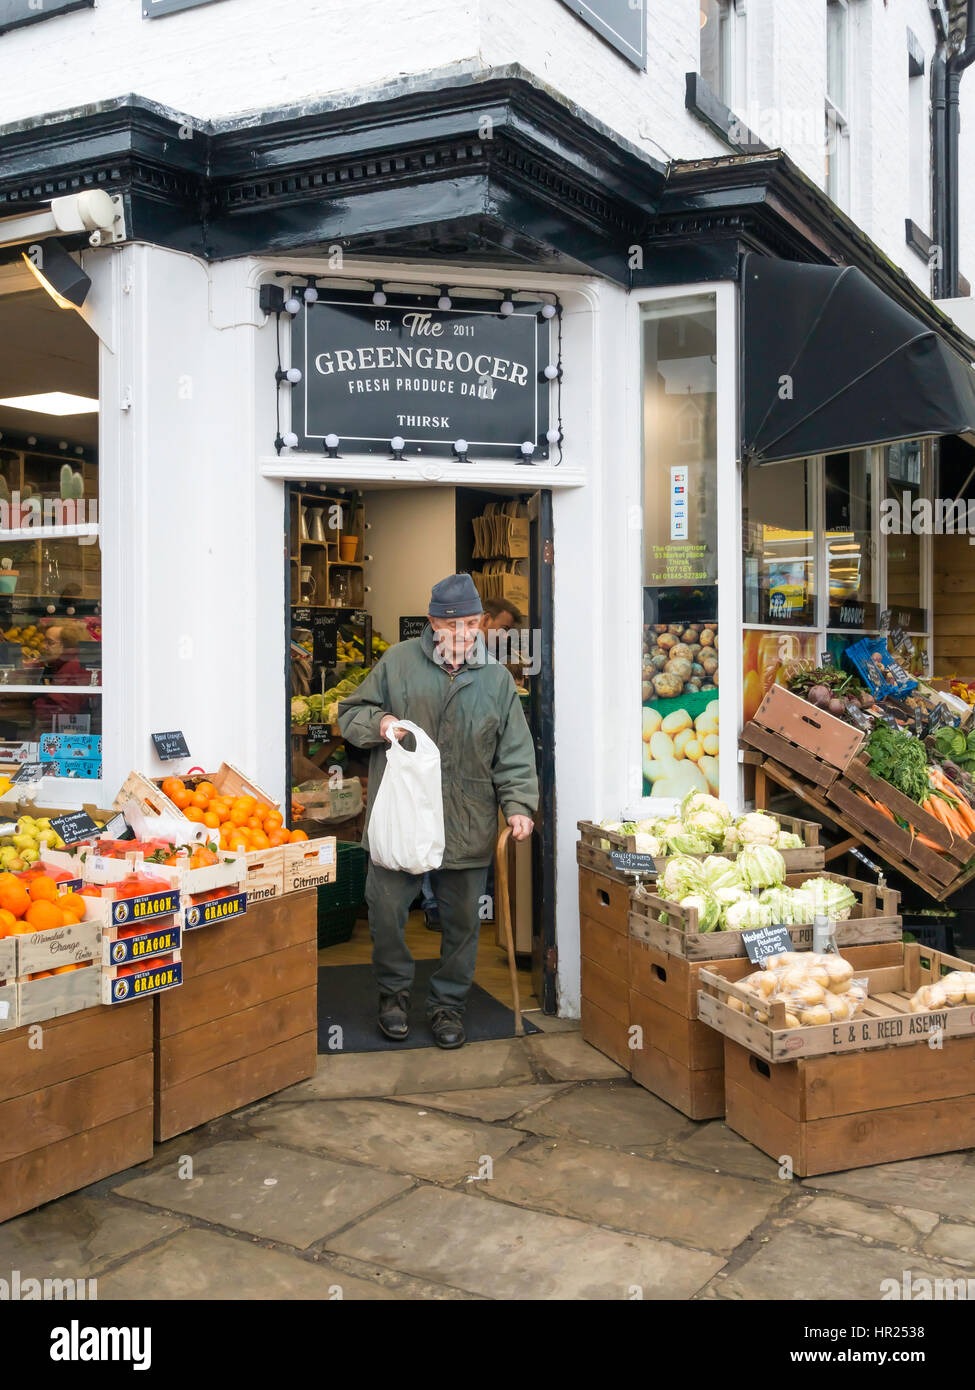 An old man exiting a greengrocers shop carrying a bag of vegetables in Thirsk North Yorkshire Stock Photo